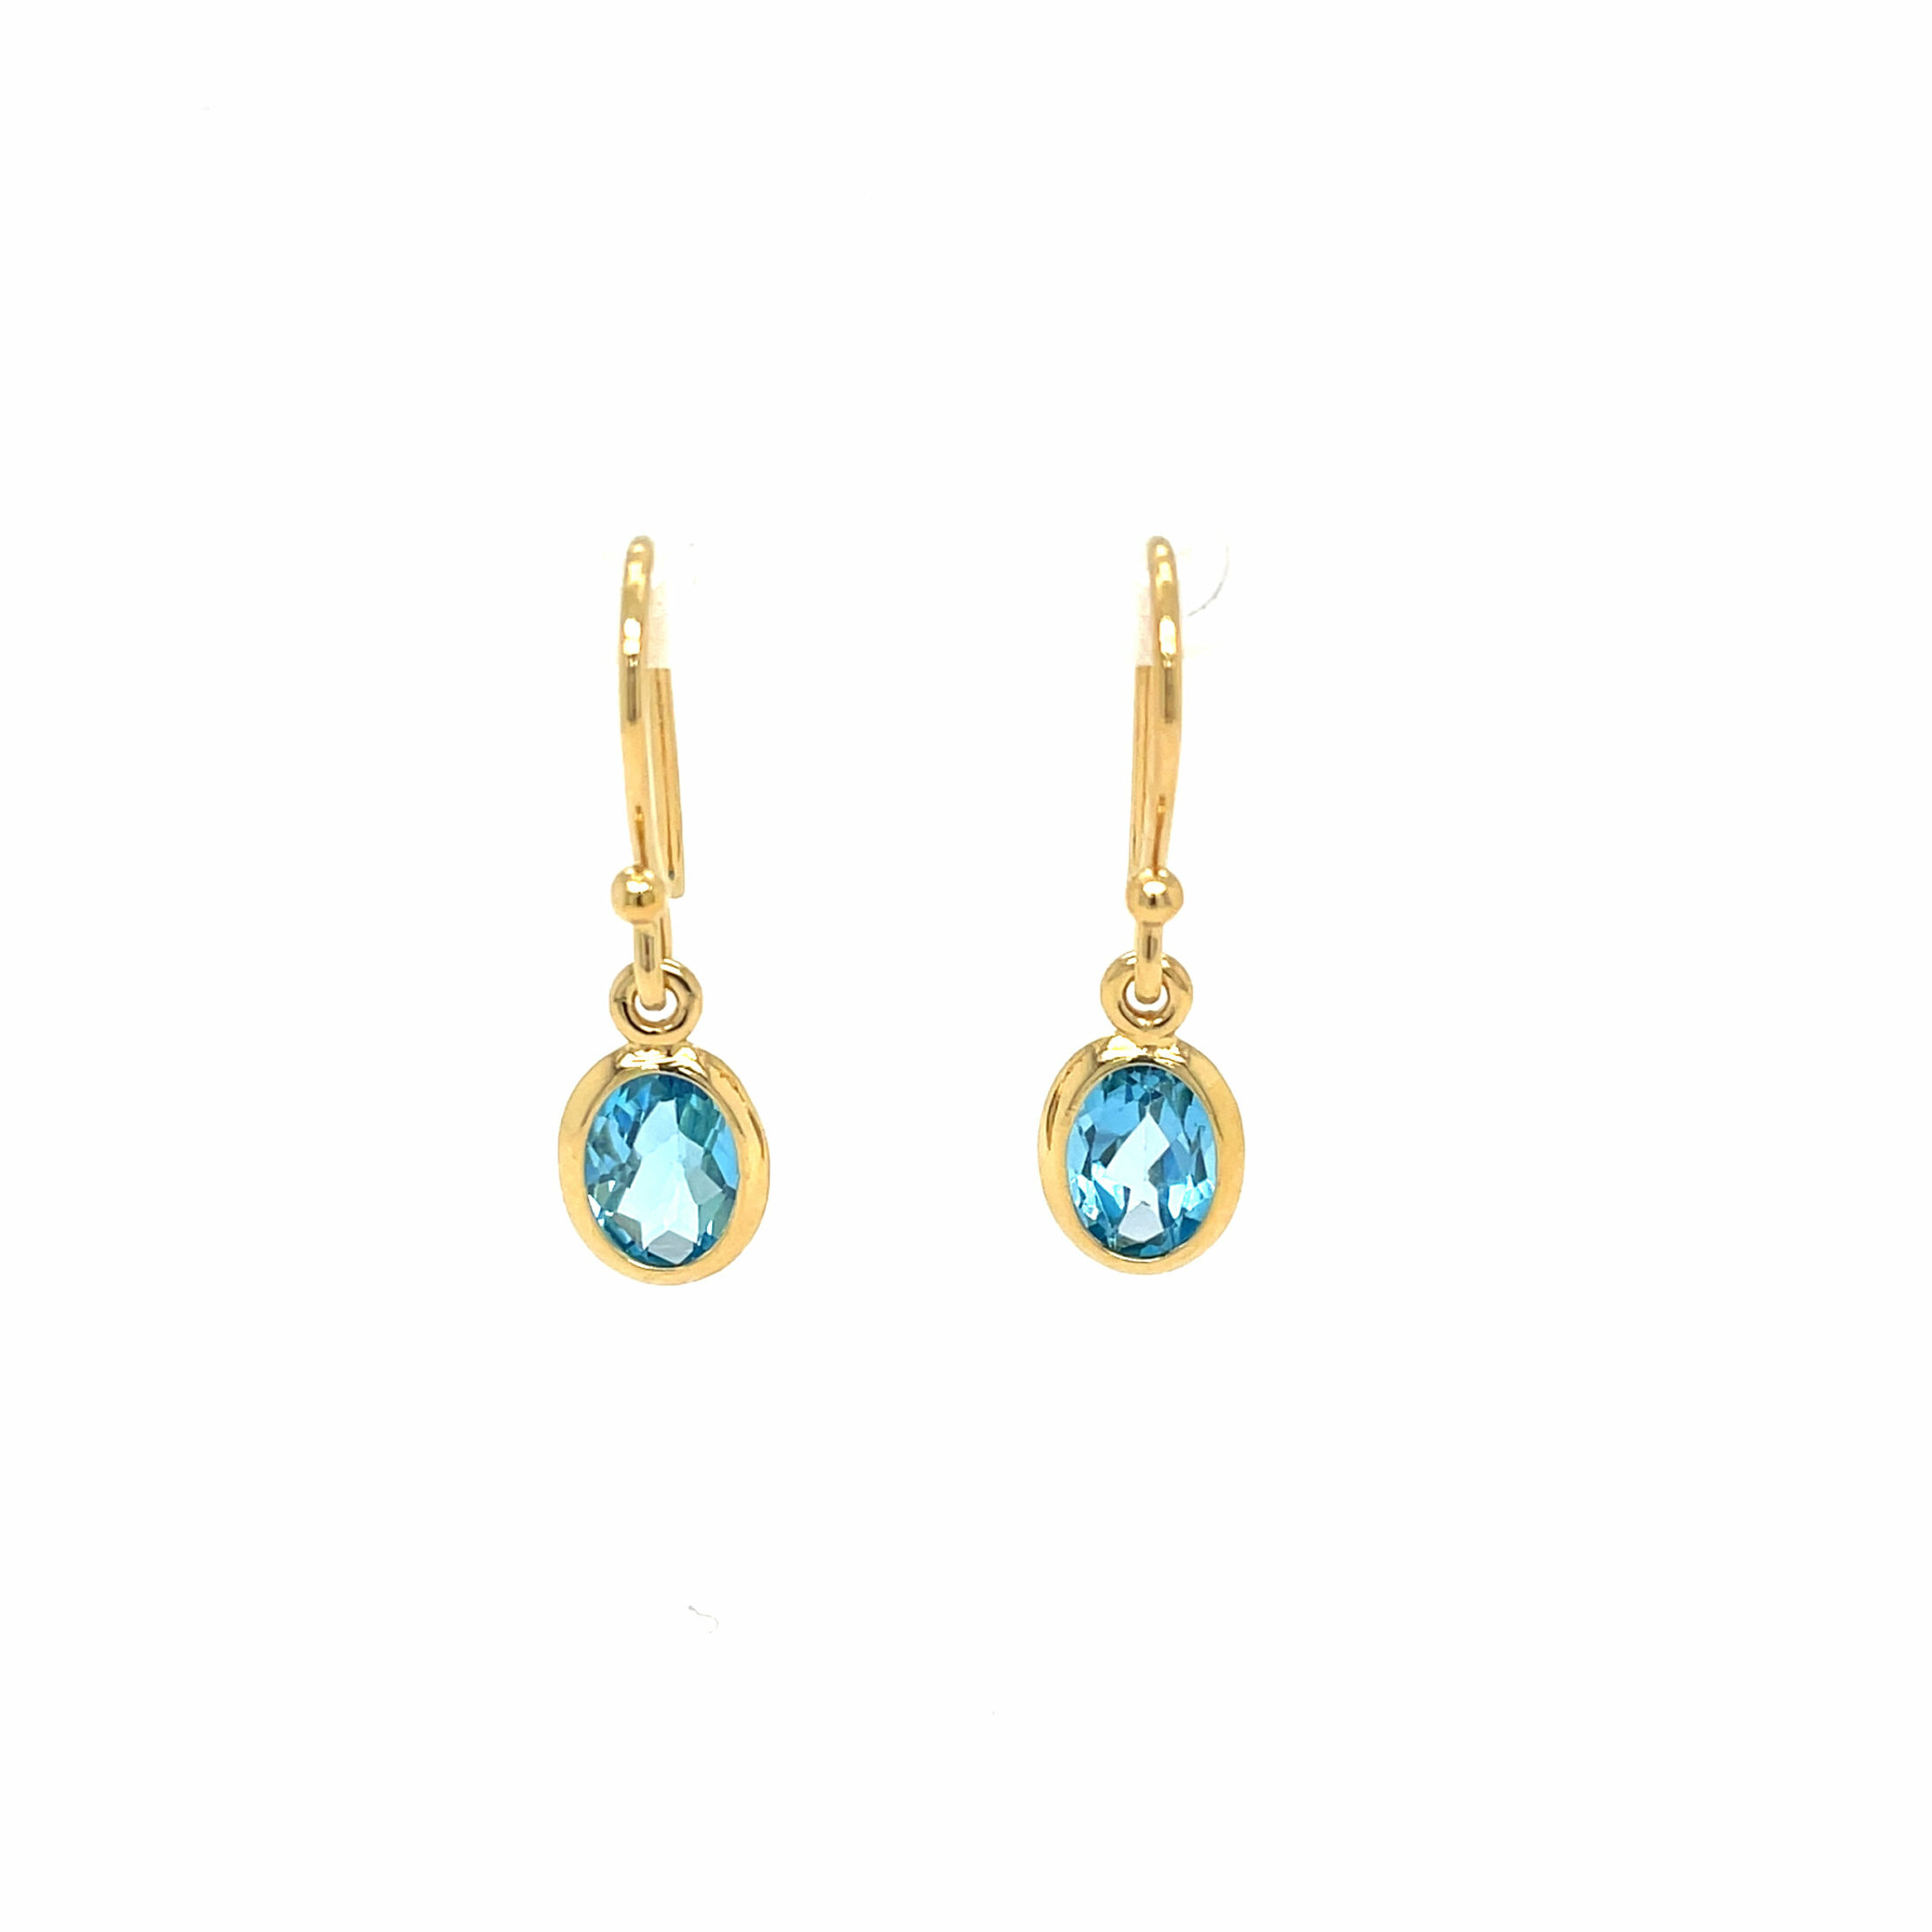 Stephen Estelle Sterling Silver with Yellow Gold Vermeil Blue Topaz Earrings